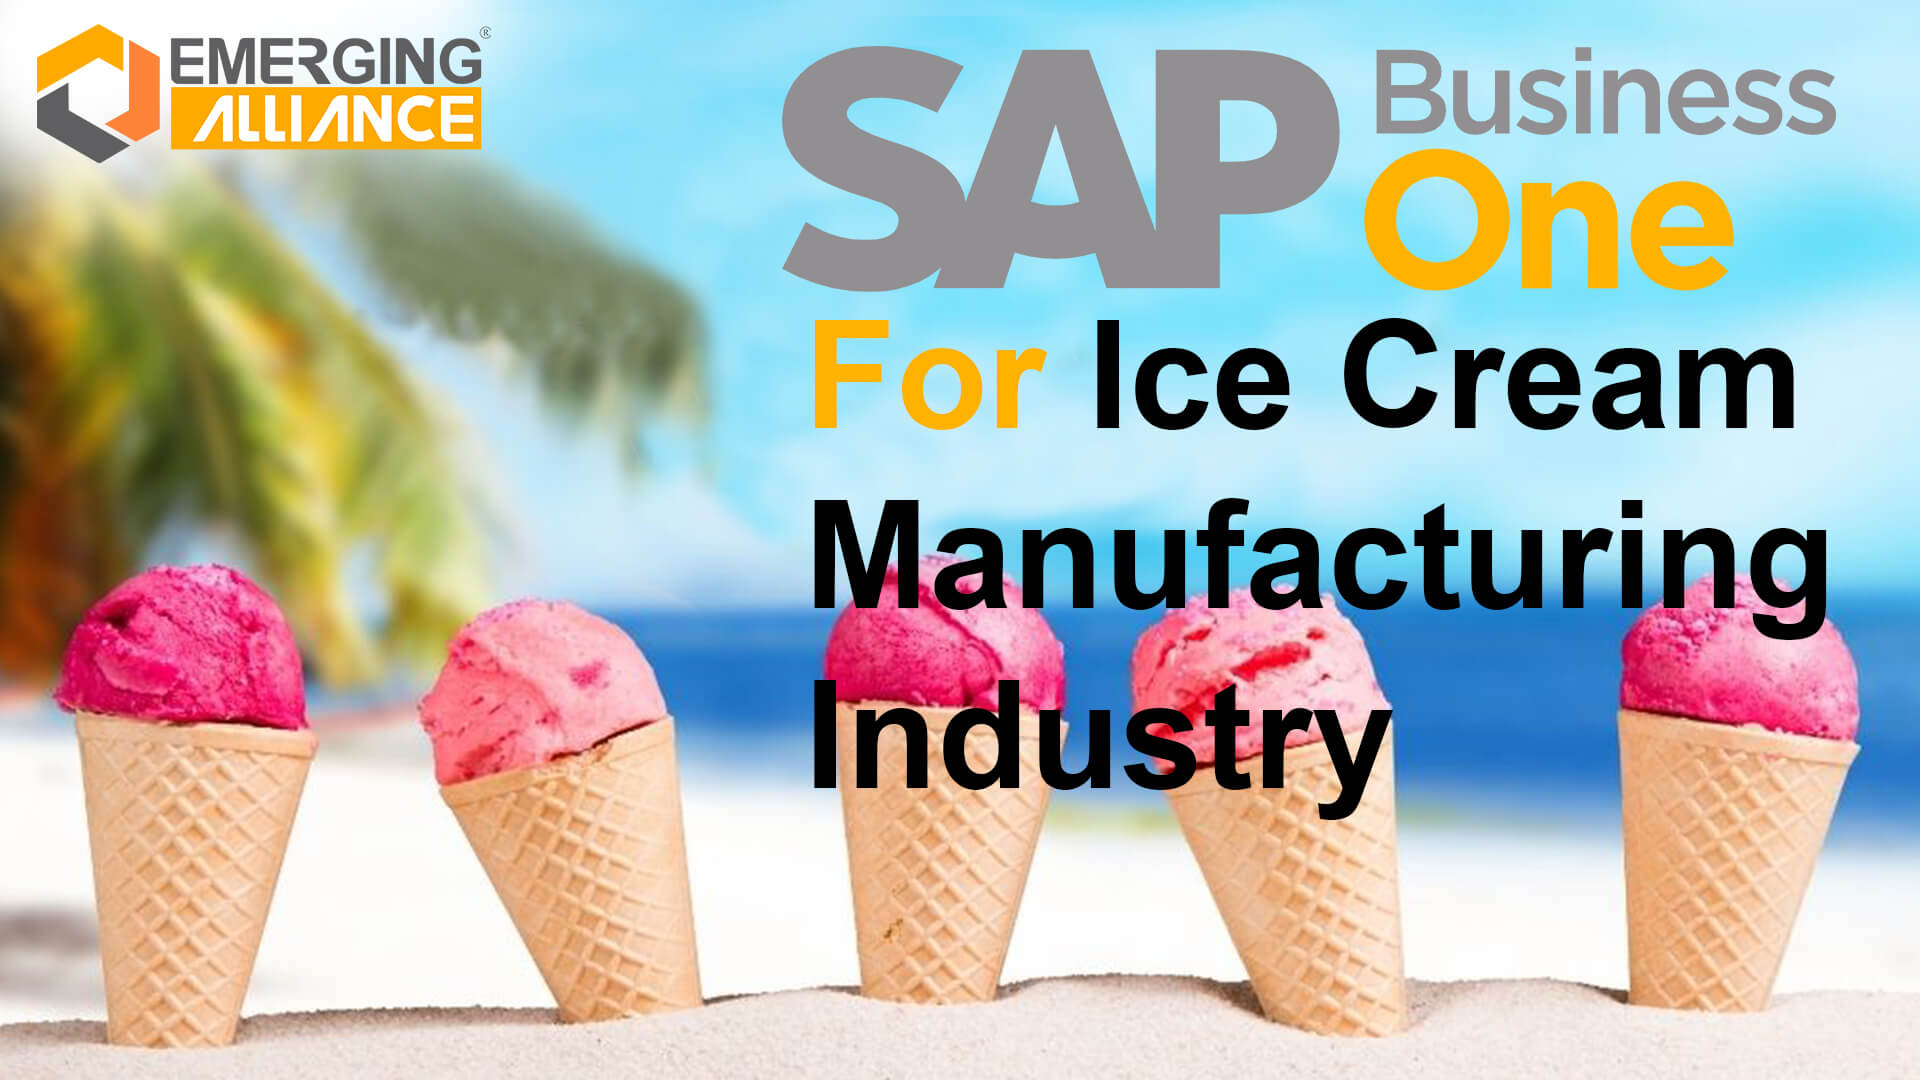 sap business one for ice cream manufacturing industry